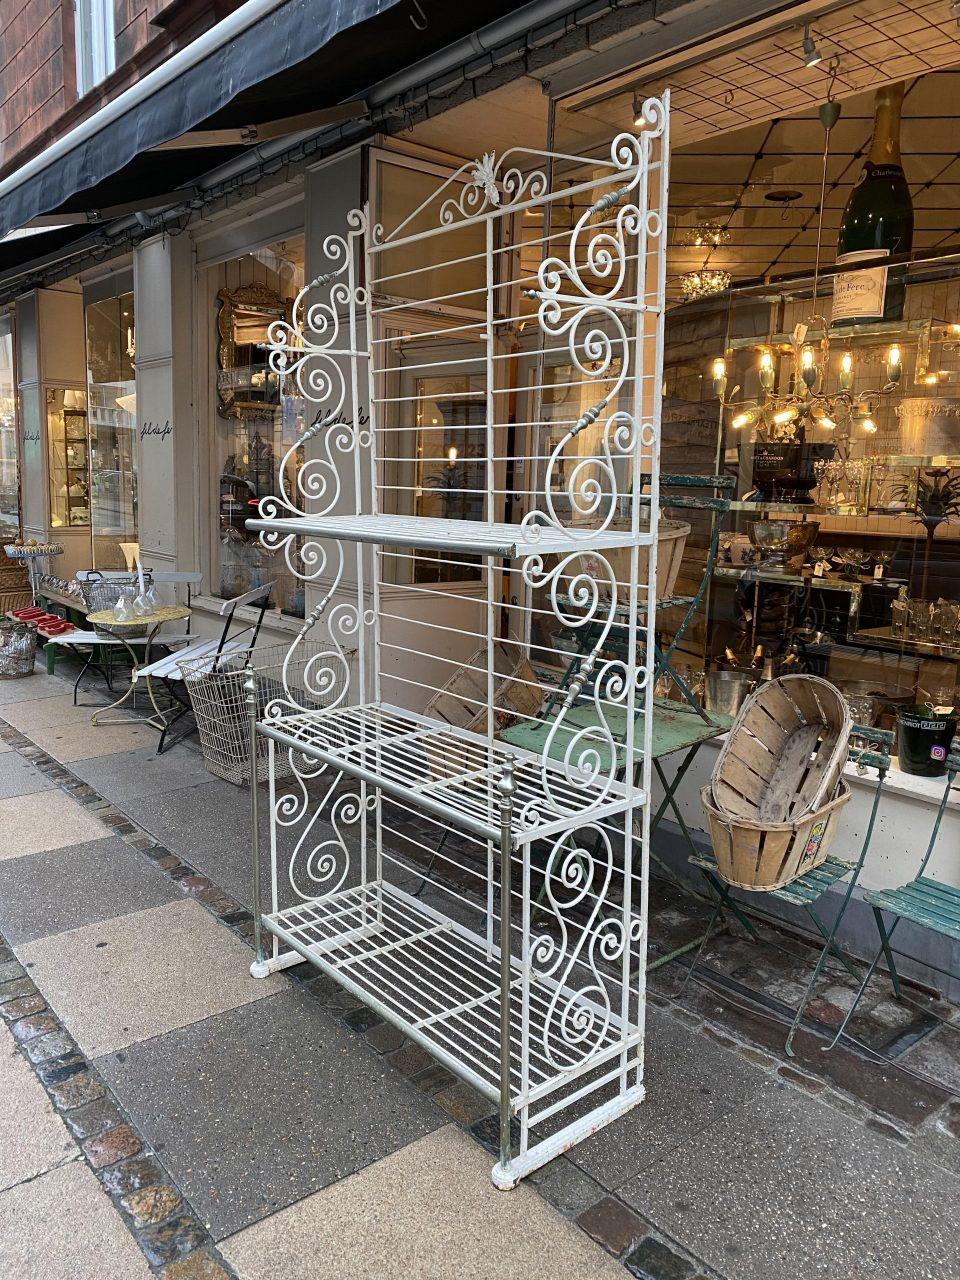 Charming eye-catching vintage French baking rack dating back to circa 1900. The shelves are made of solid wrought iron, cast iron and chrome, and have many fine curved details. Painted white. Gorgeous patina. Note the fine emblem at the top,